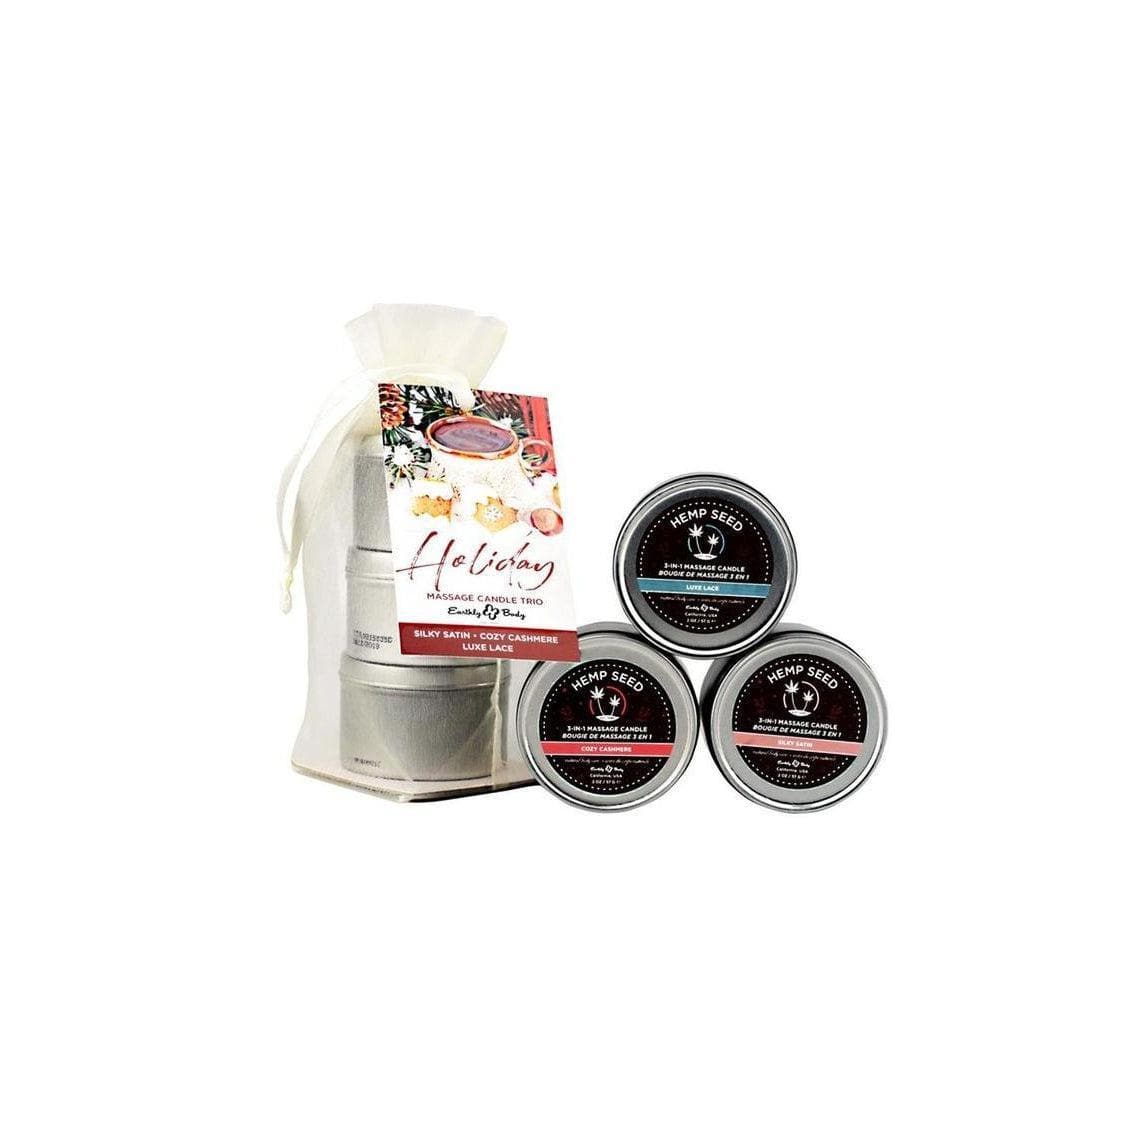 Earthly Body 2022 Holiday Candle Trio Bag 2 oz - Romantic Blessings